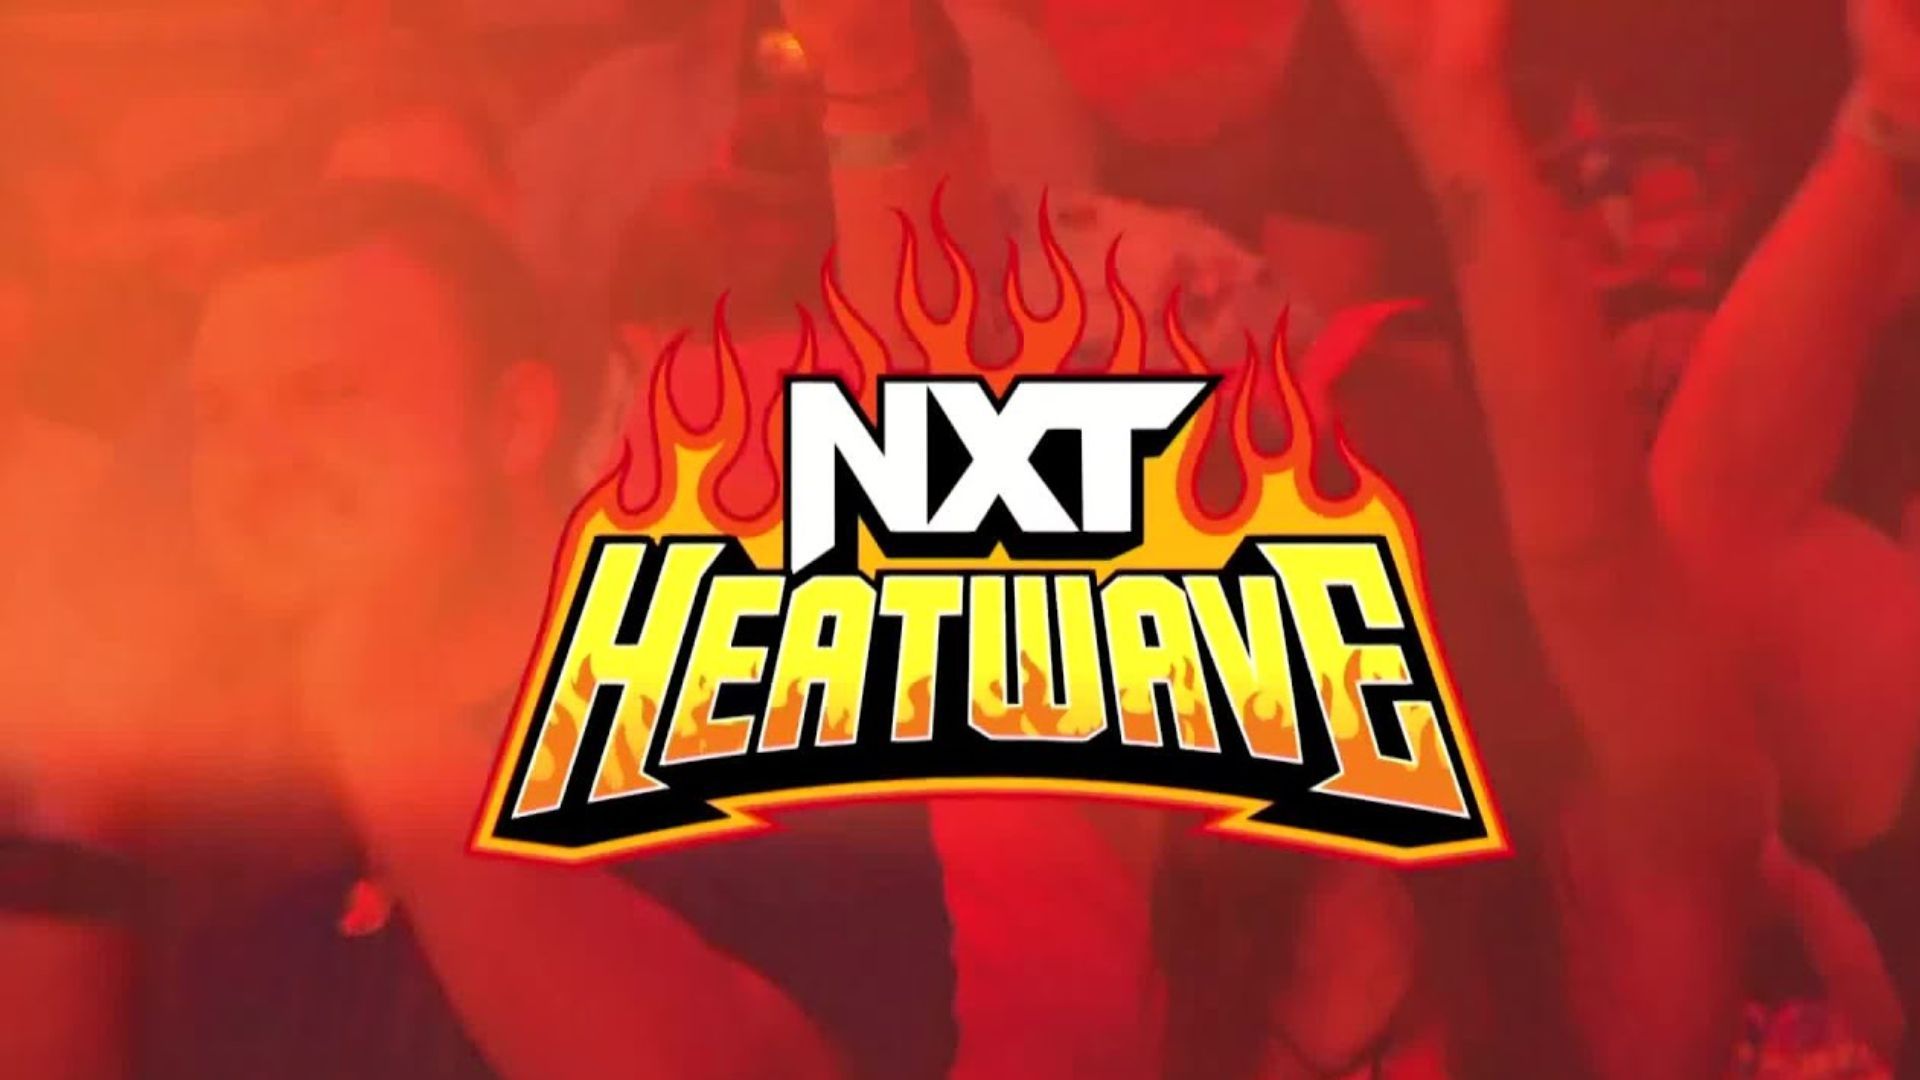 NXT Heatwave brought in big numbers for WWE